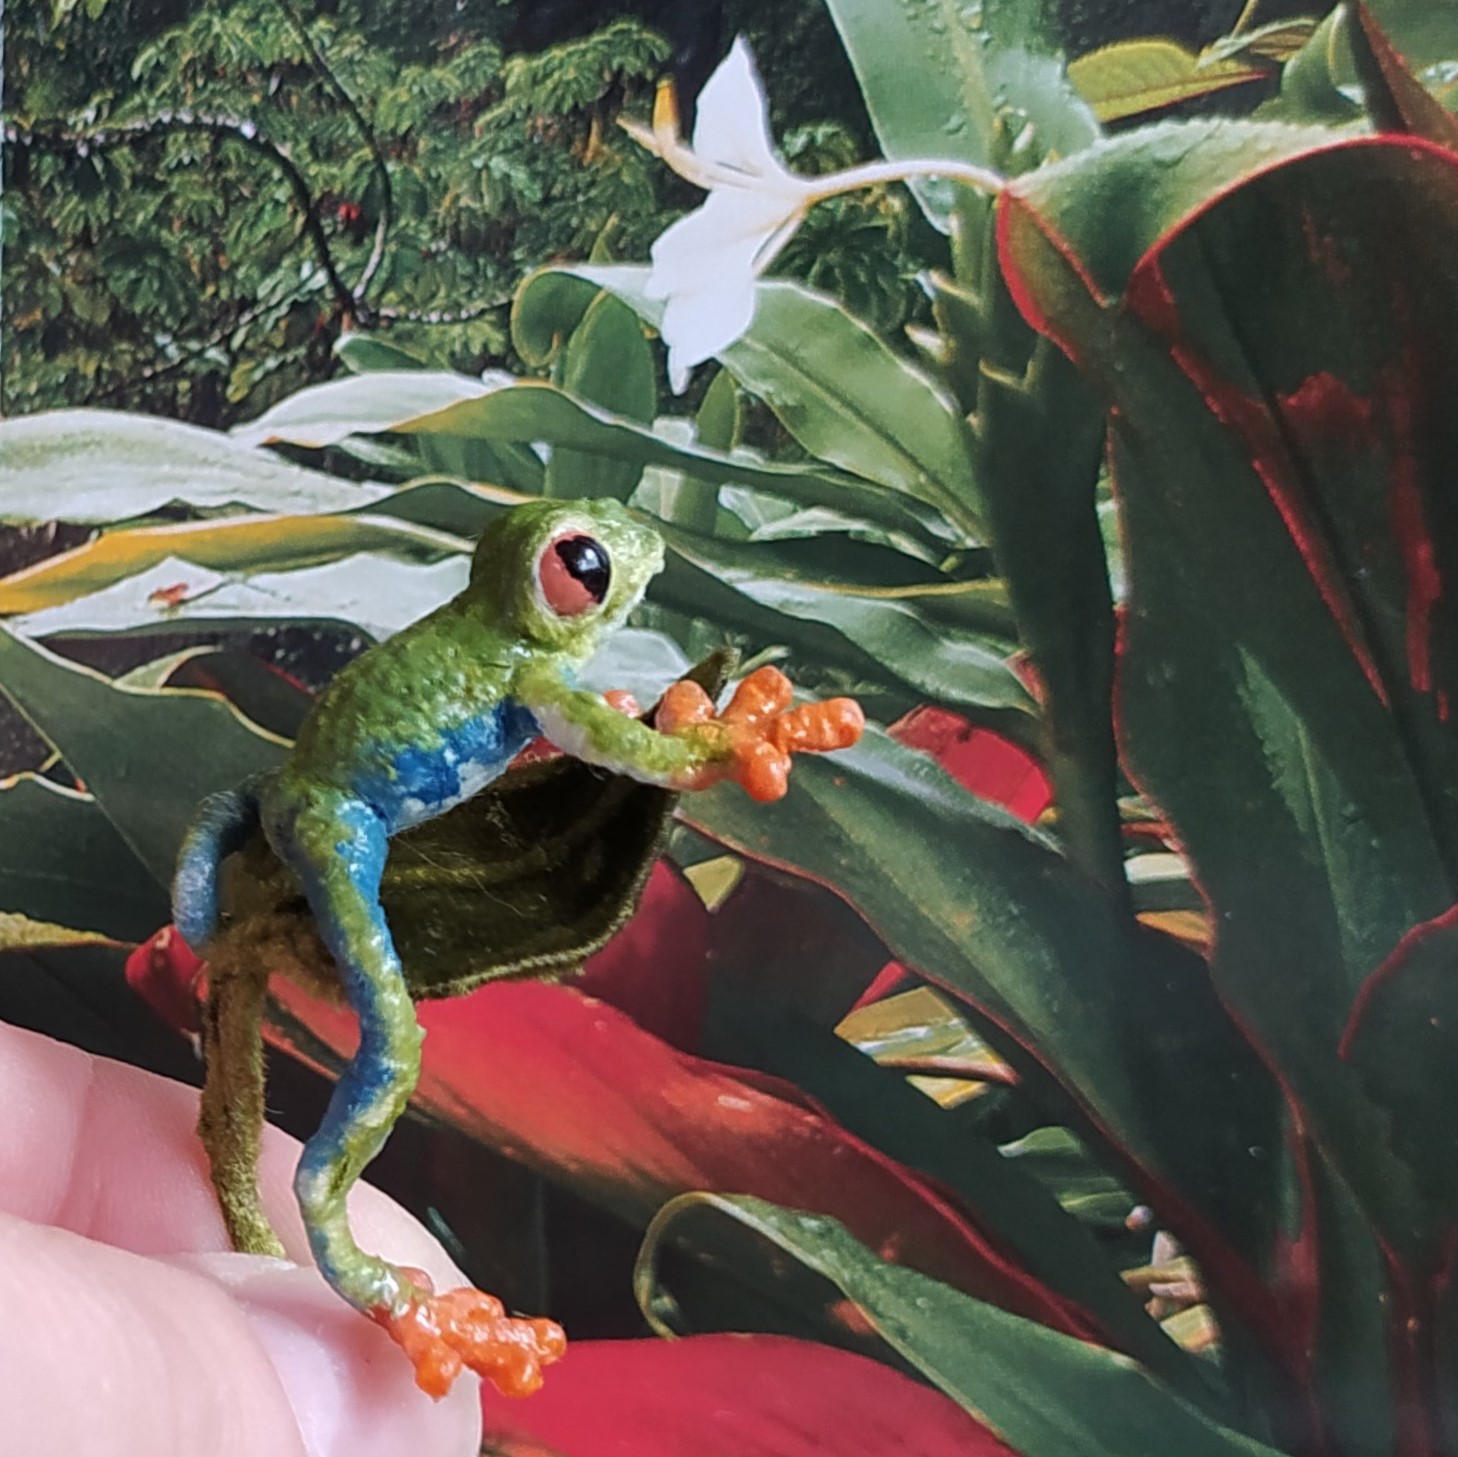 Red-eyed tree frog Miniature collection toy - DailyDoll Shop